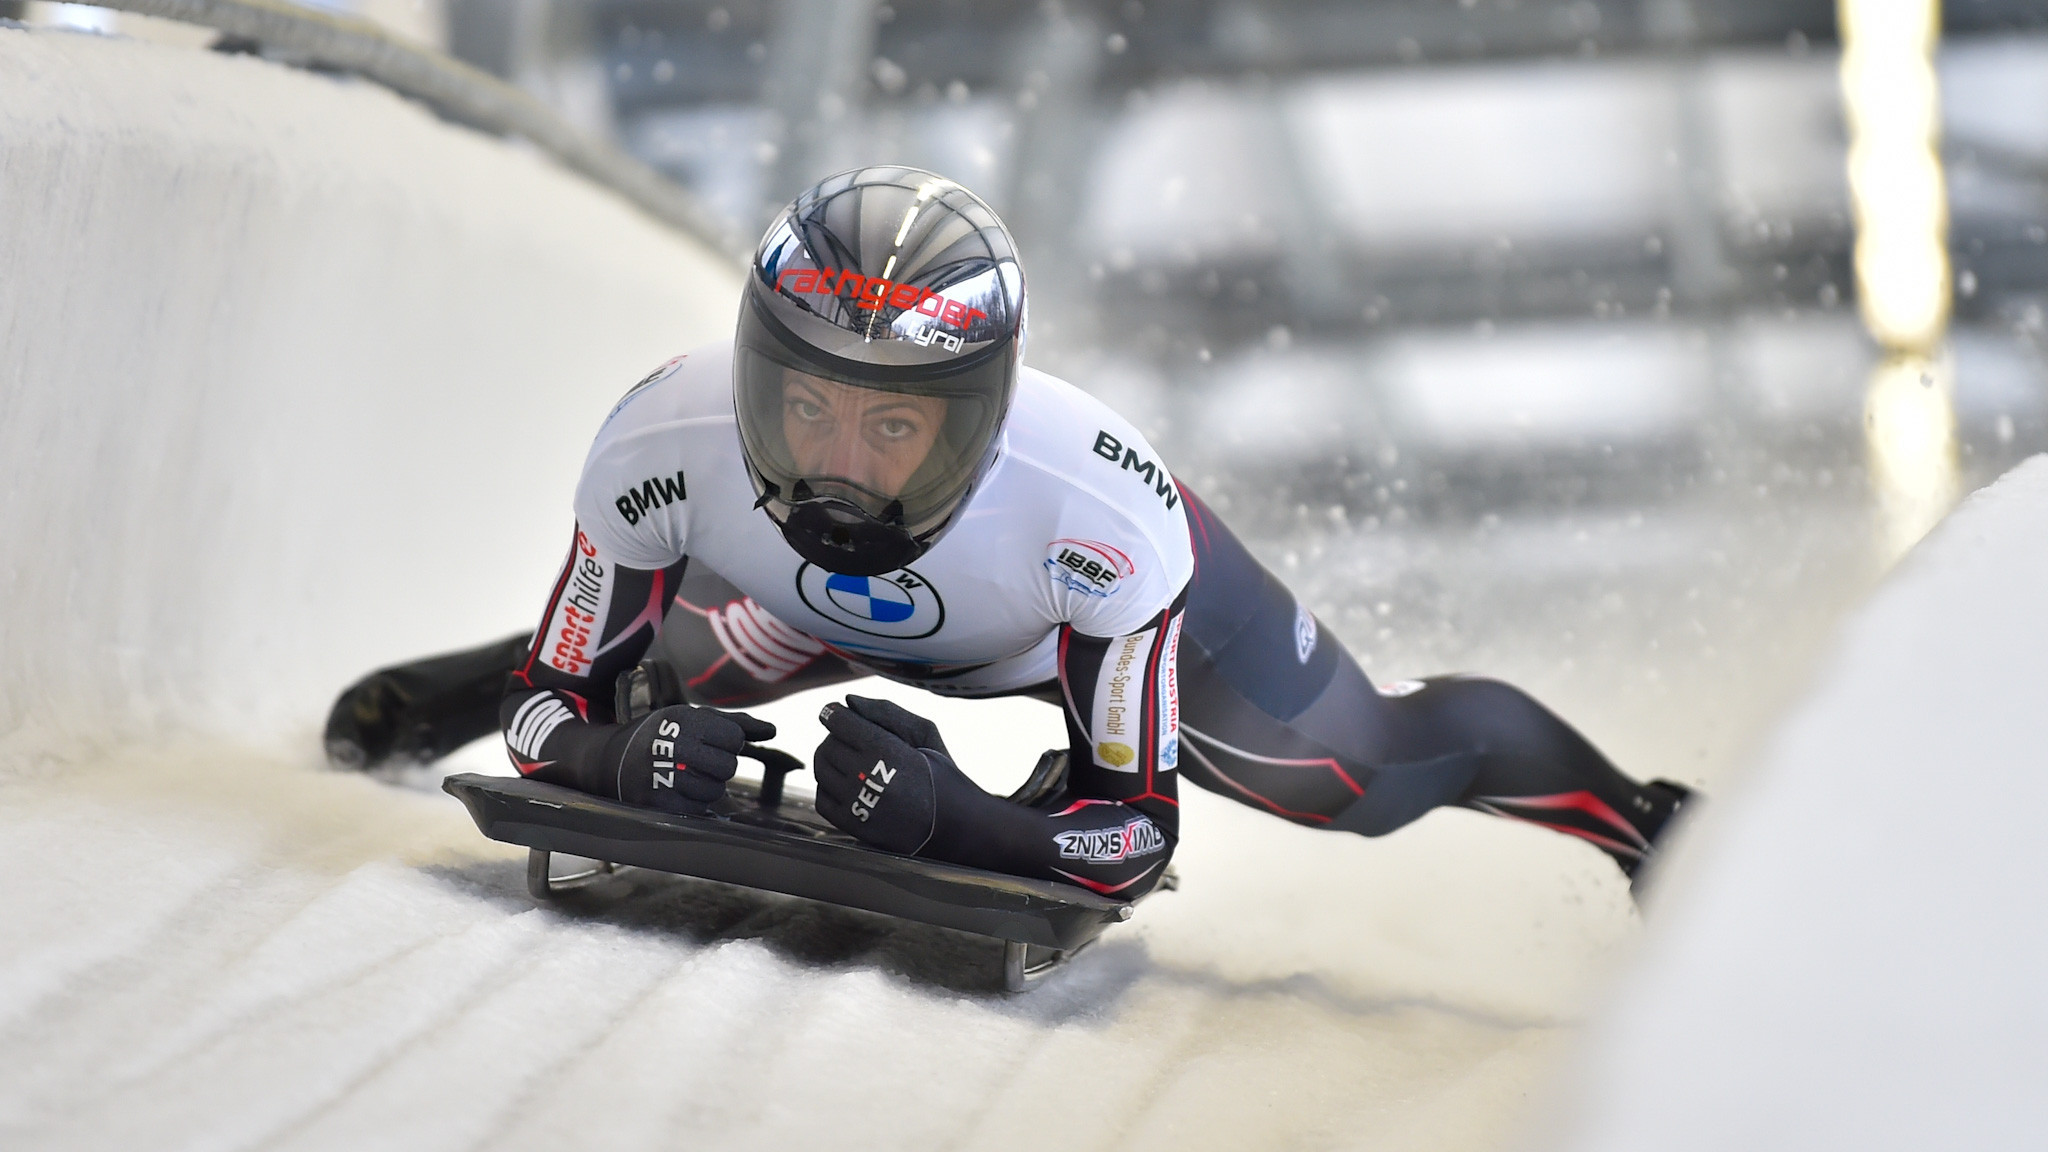 Austria's Janine Flock won her first World Cup race of the season at the sixth attempt ©IBSF/Viesturs Lacis